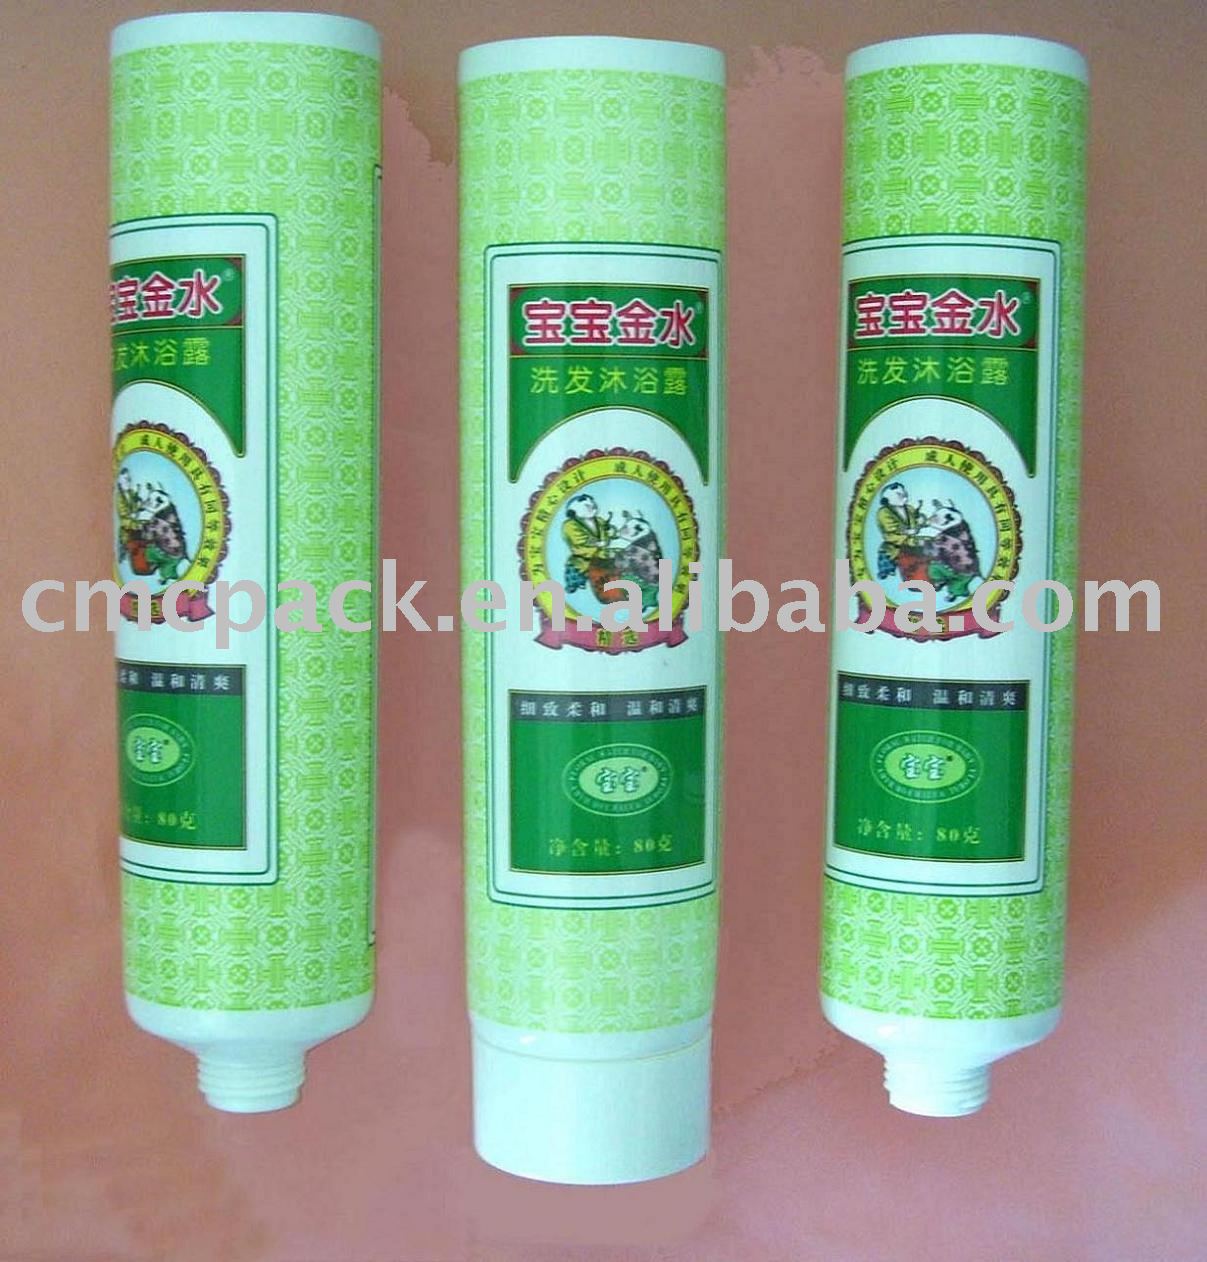  - squeezable_plastic_tubes_for_baby_care_lotion